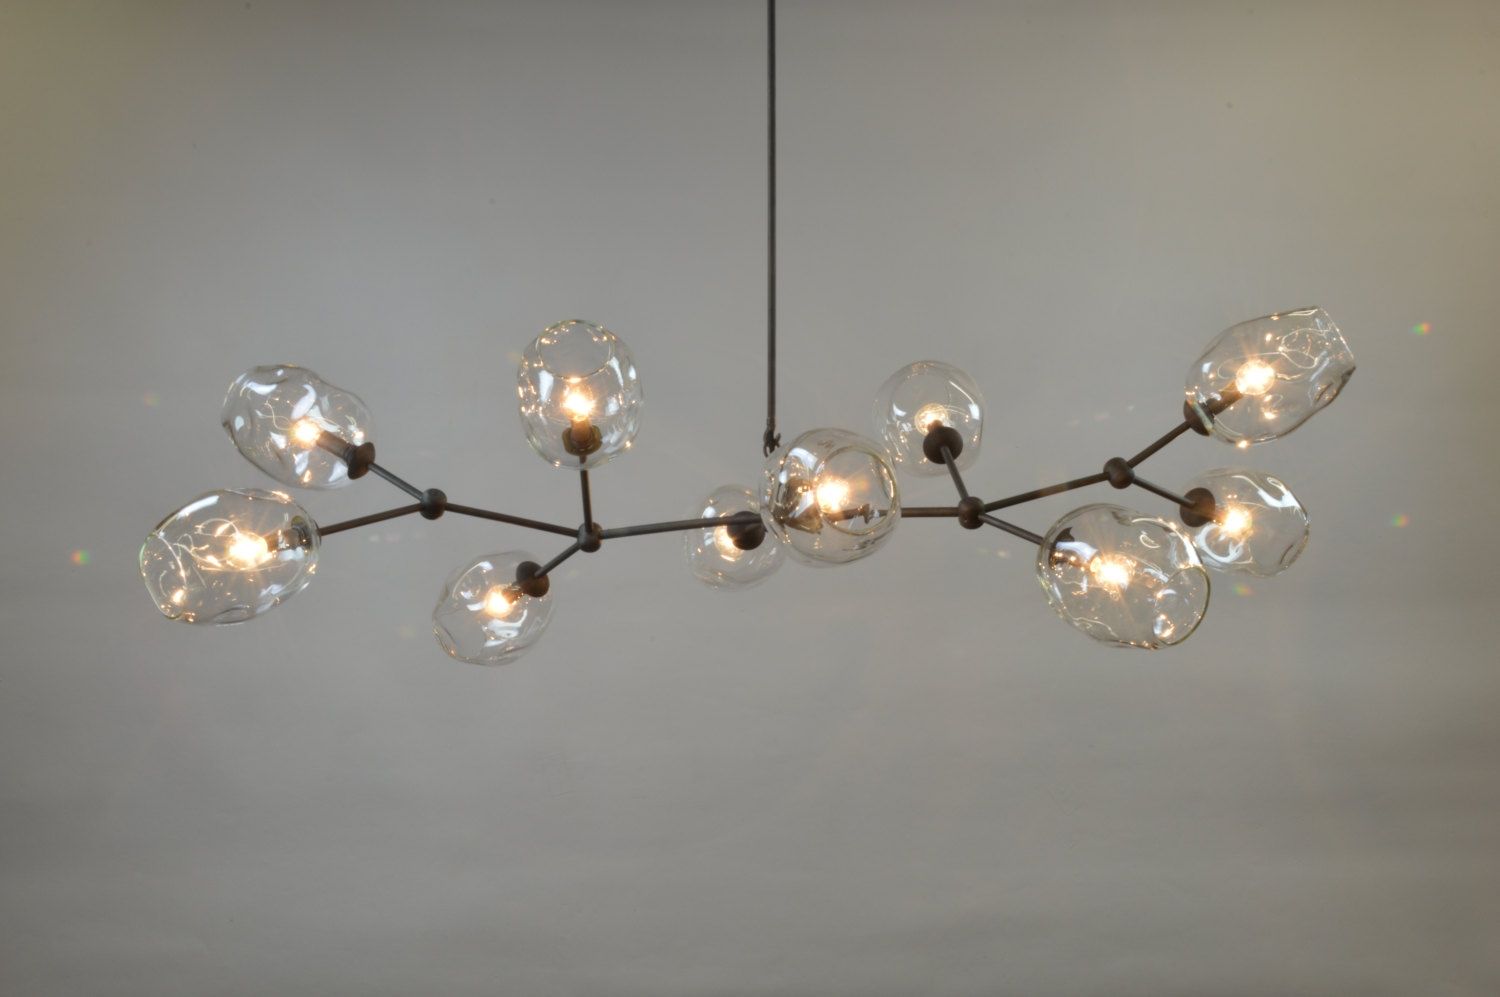 10 Globe Hand Blown Glass Staccato Branch Chandelier Hanging Intended For Branch Chandeliers (View 8 of 12)